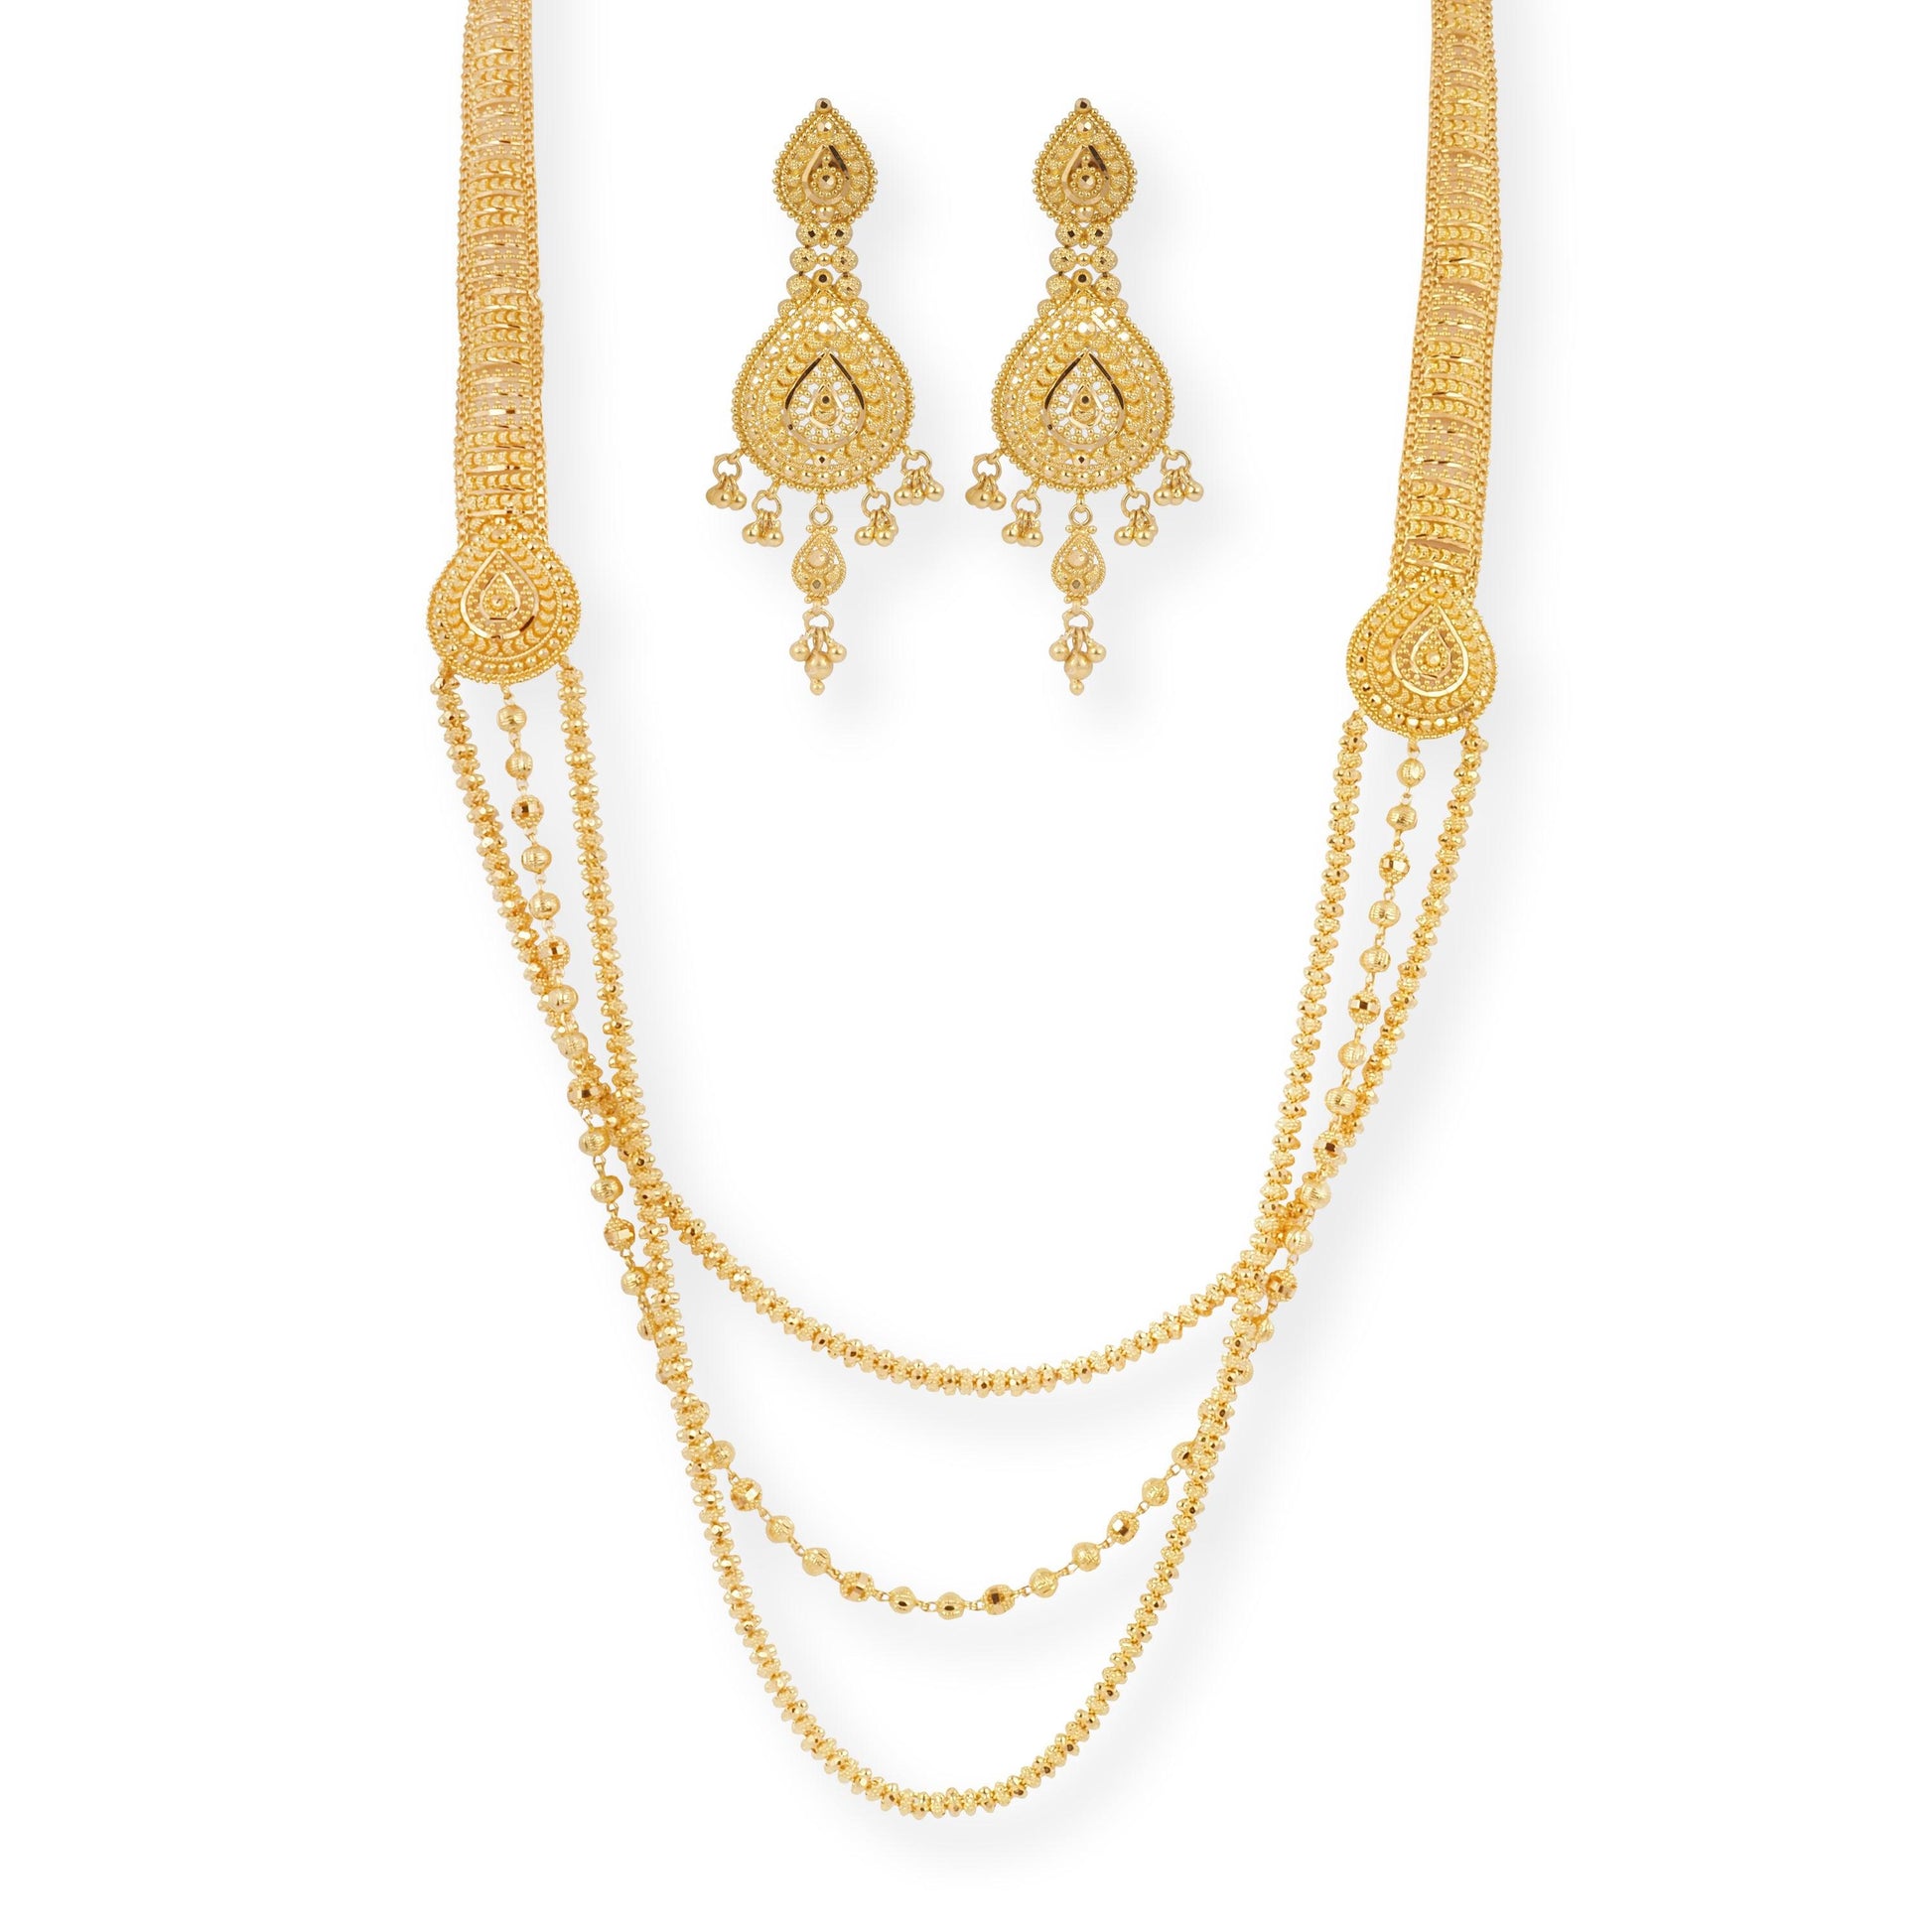 22ct Gold Filigree Design Necklace and Earrings Set - 8603 - Minar Jewellers